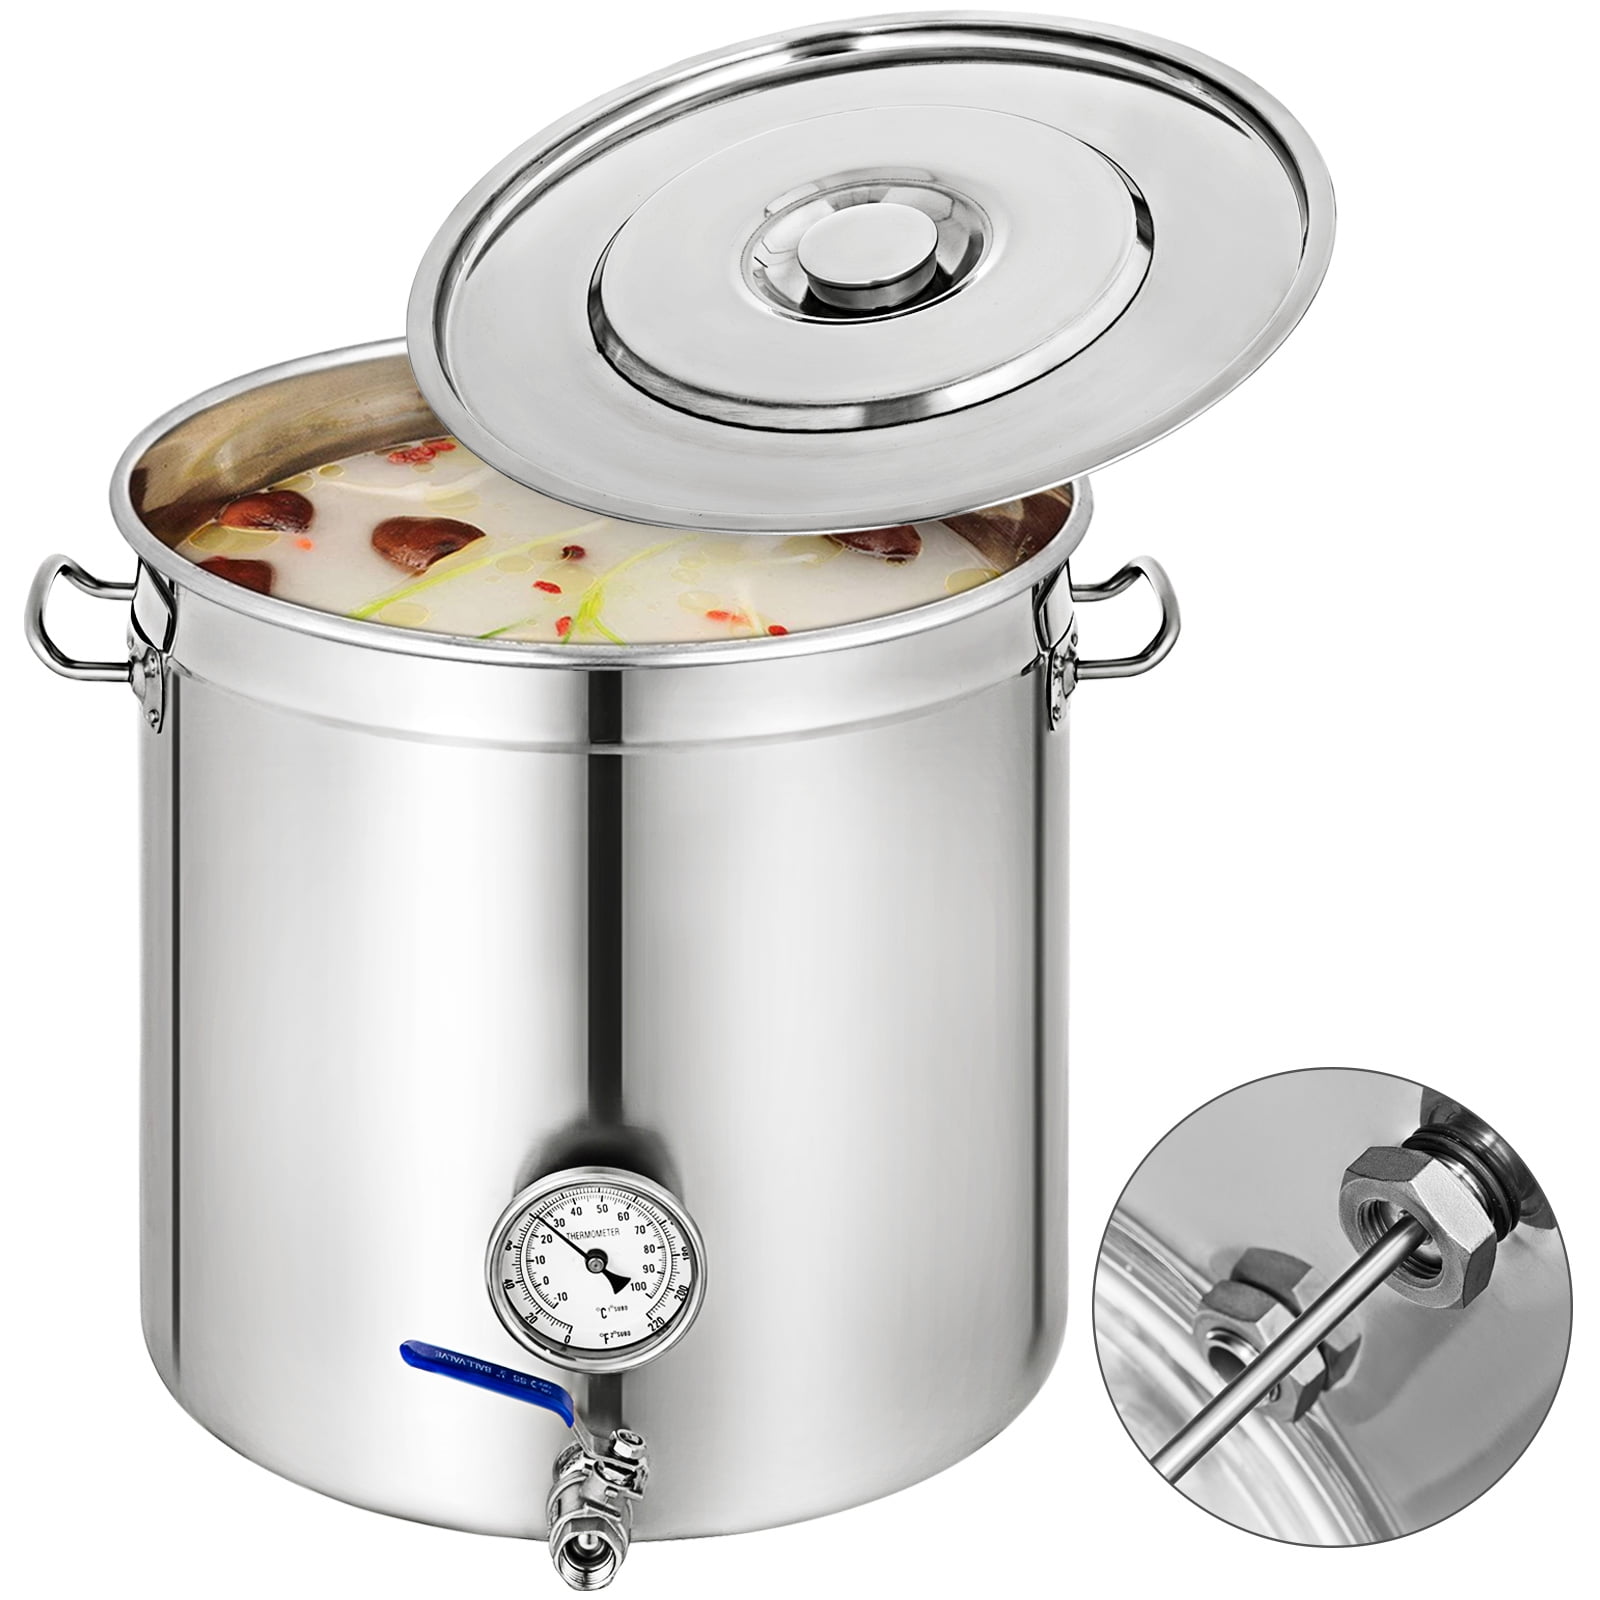 NEW 30 QT Quart Polished Stainless Steel Stock Pot Brewing Kettle Large w/ Lid 